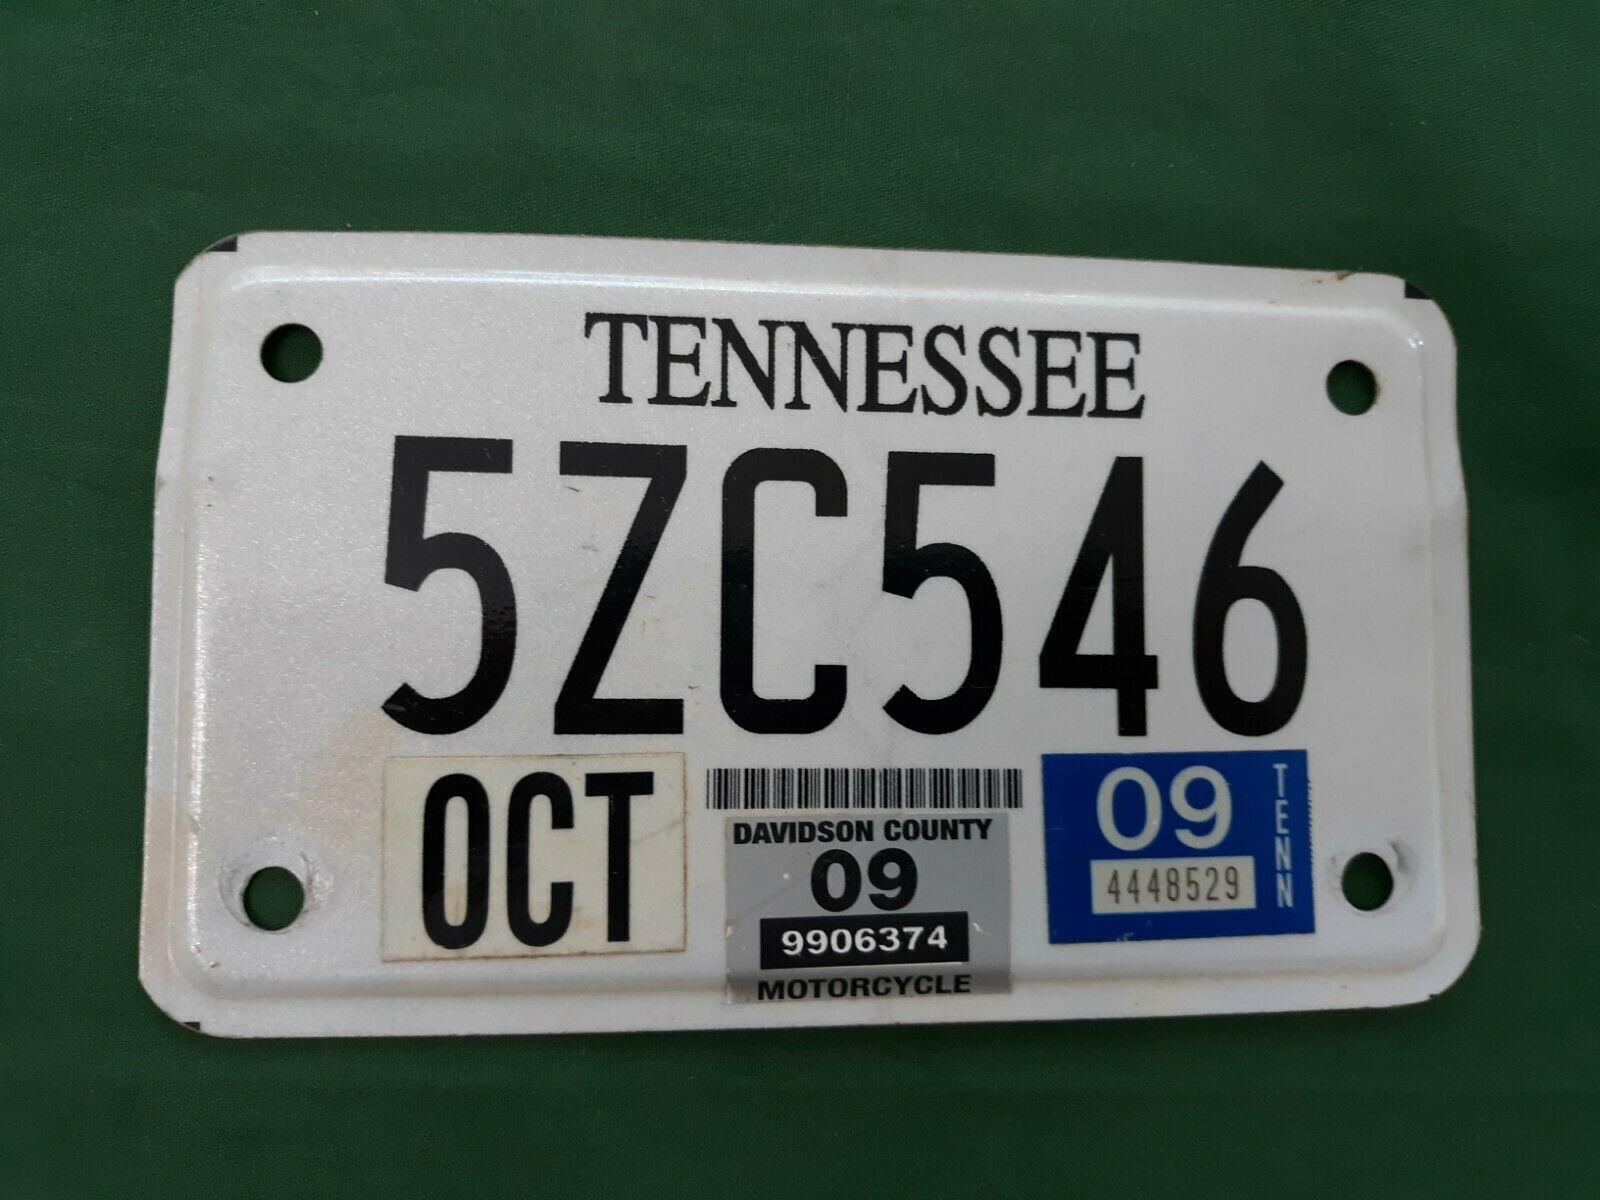 2009 Tennessee Motorcycle License Plate